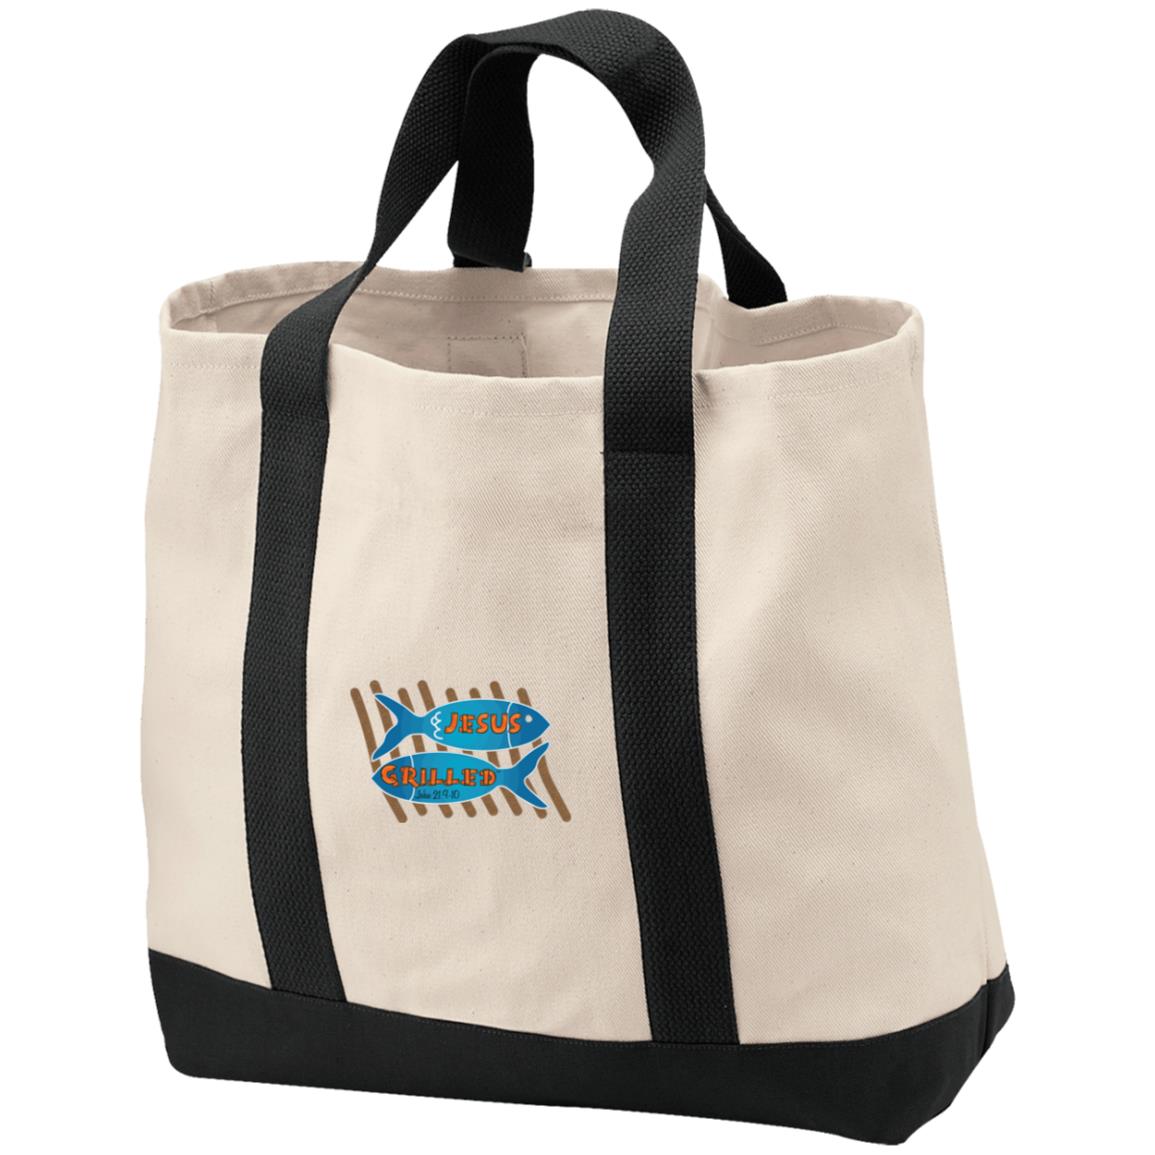 Grilled Fish 2-Tone Shopping Tote